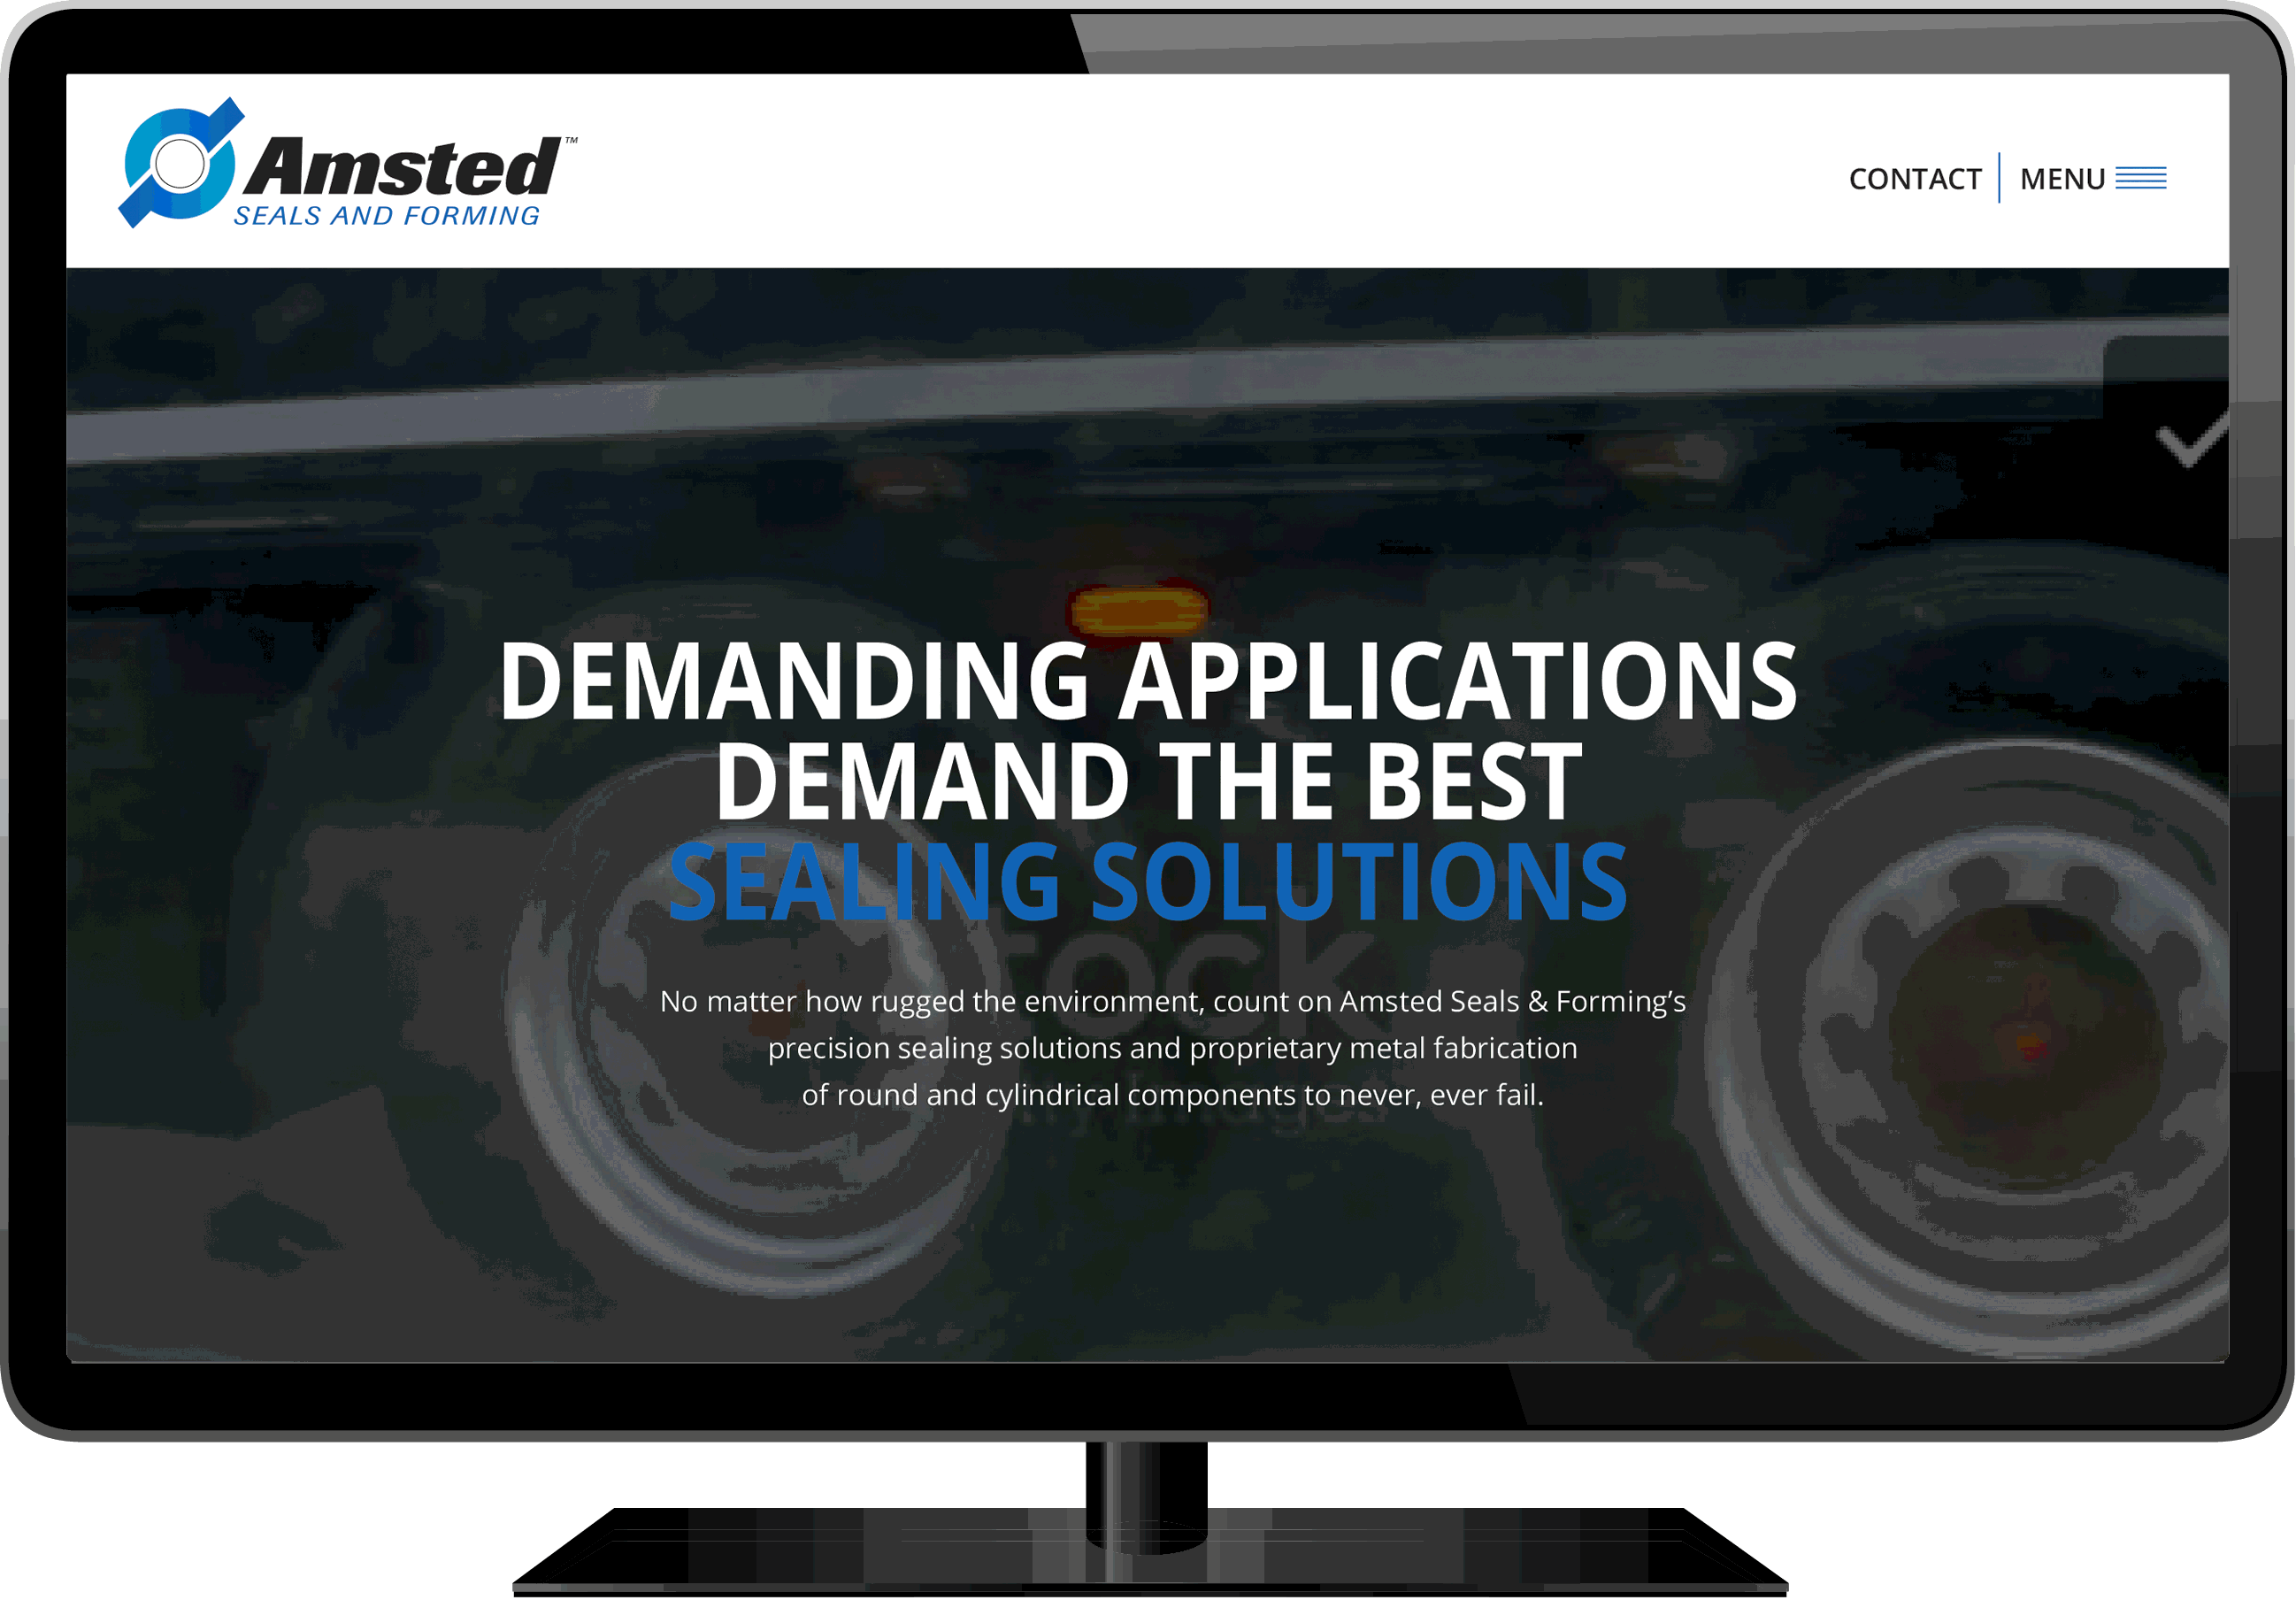 Amsted Seals and Forming website